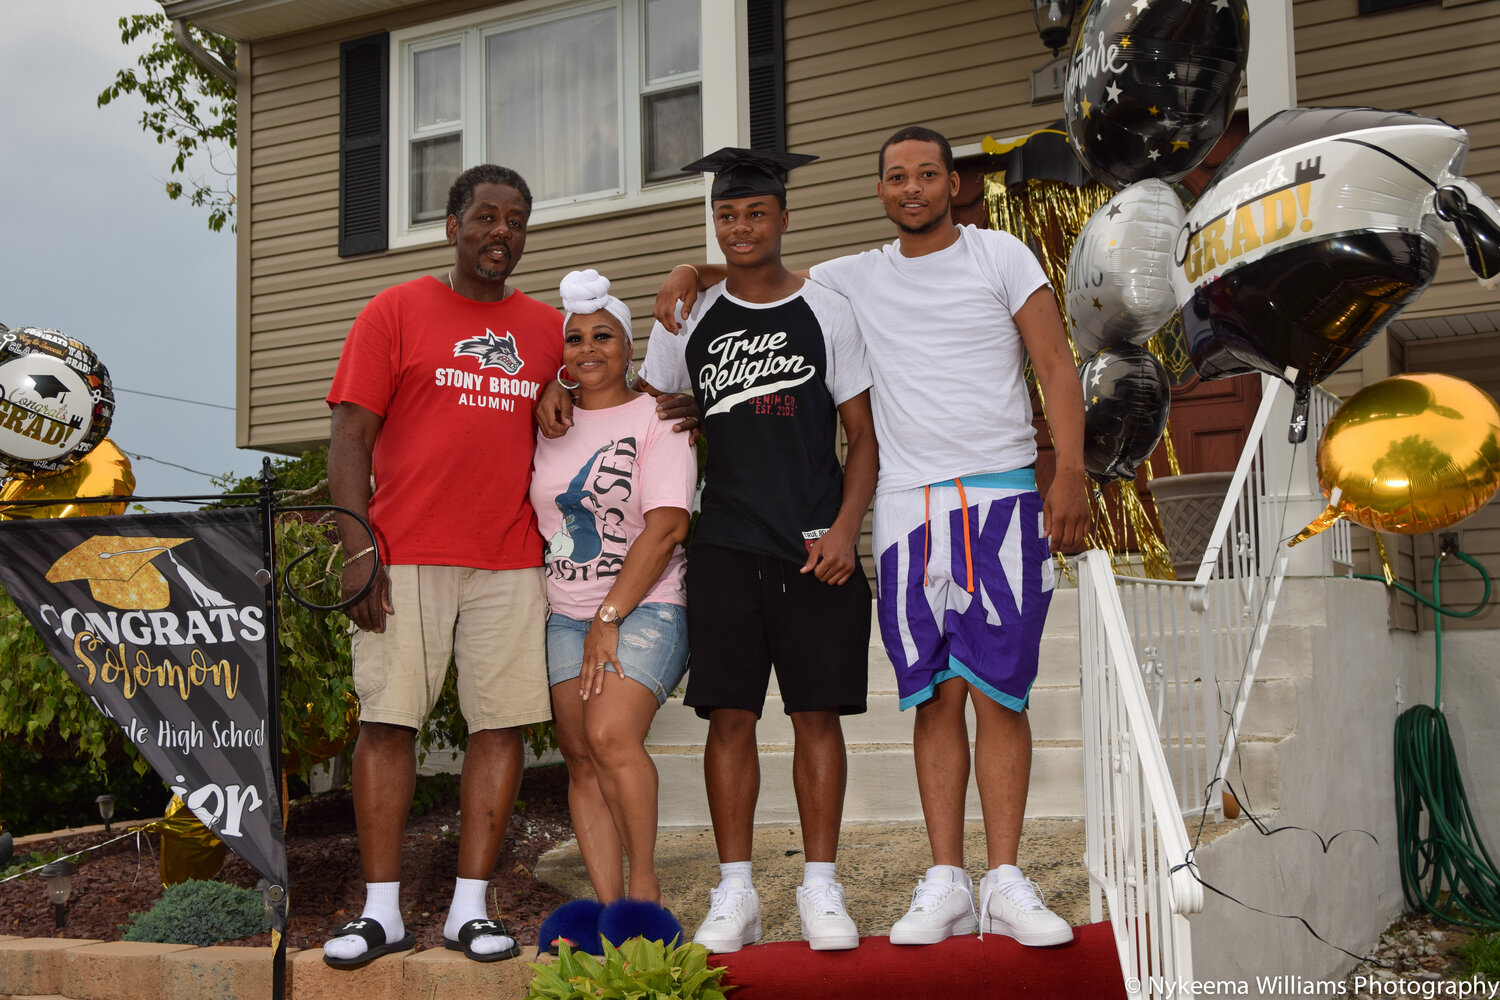 A new scholarship will honor Xavier Parris, who was killed in a car crash in Hempstead last October. Above, Parris, at the far right, with his mother, Empress Henderson, his brother, Solomon Henderson, and his father, Terrance Henderson.